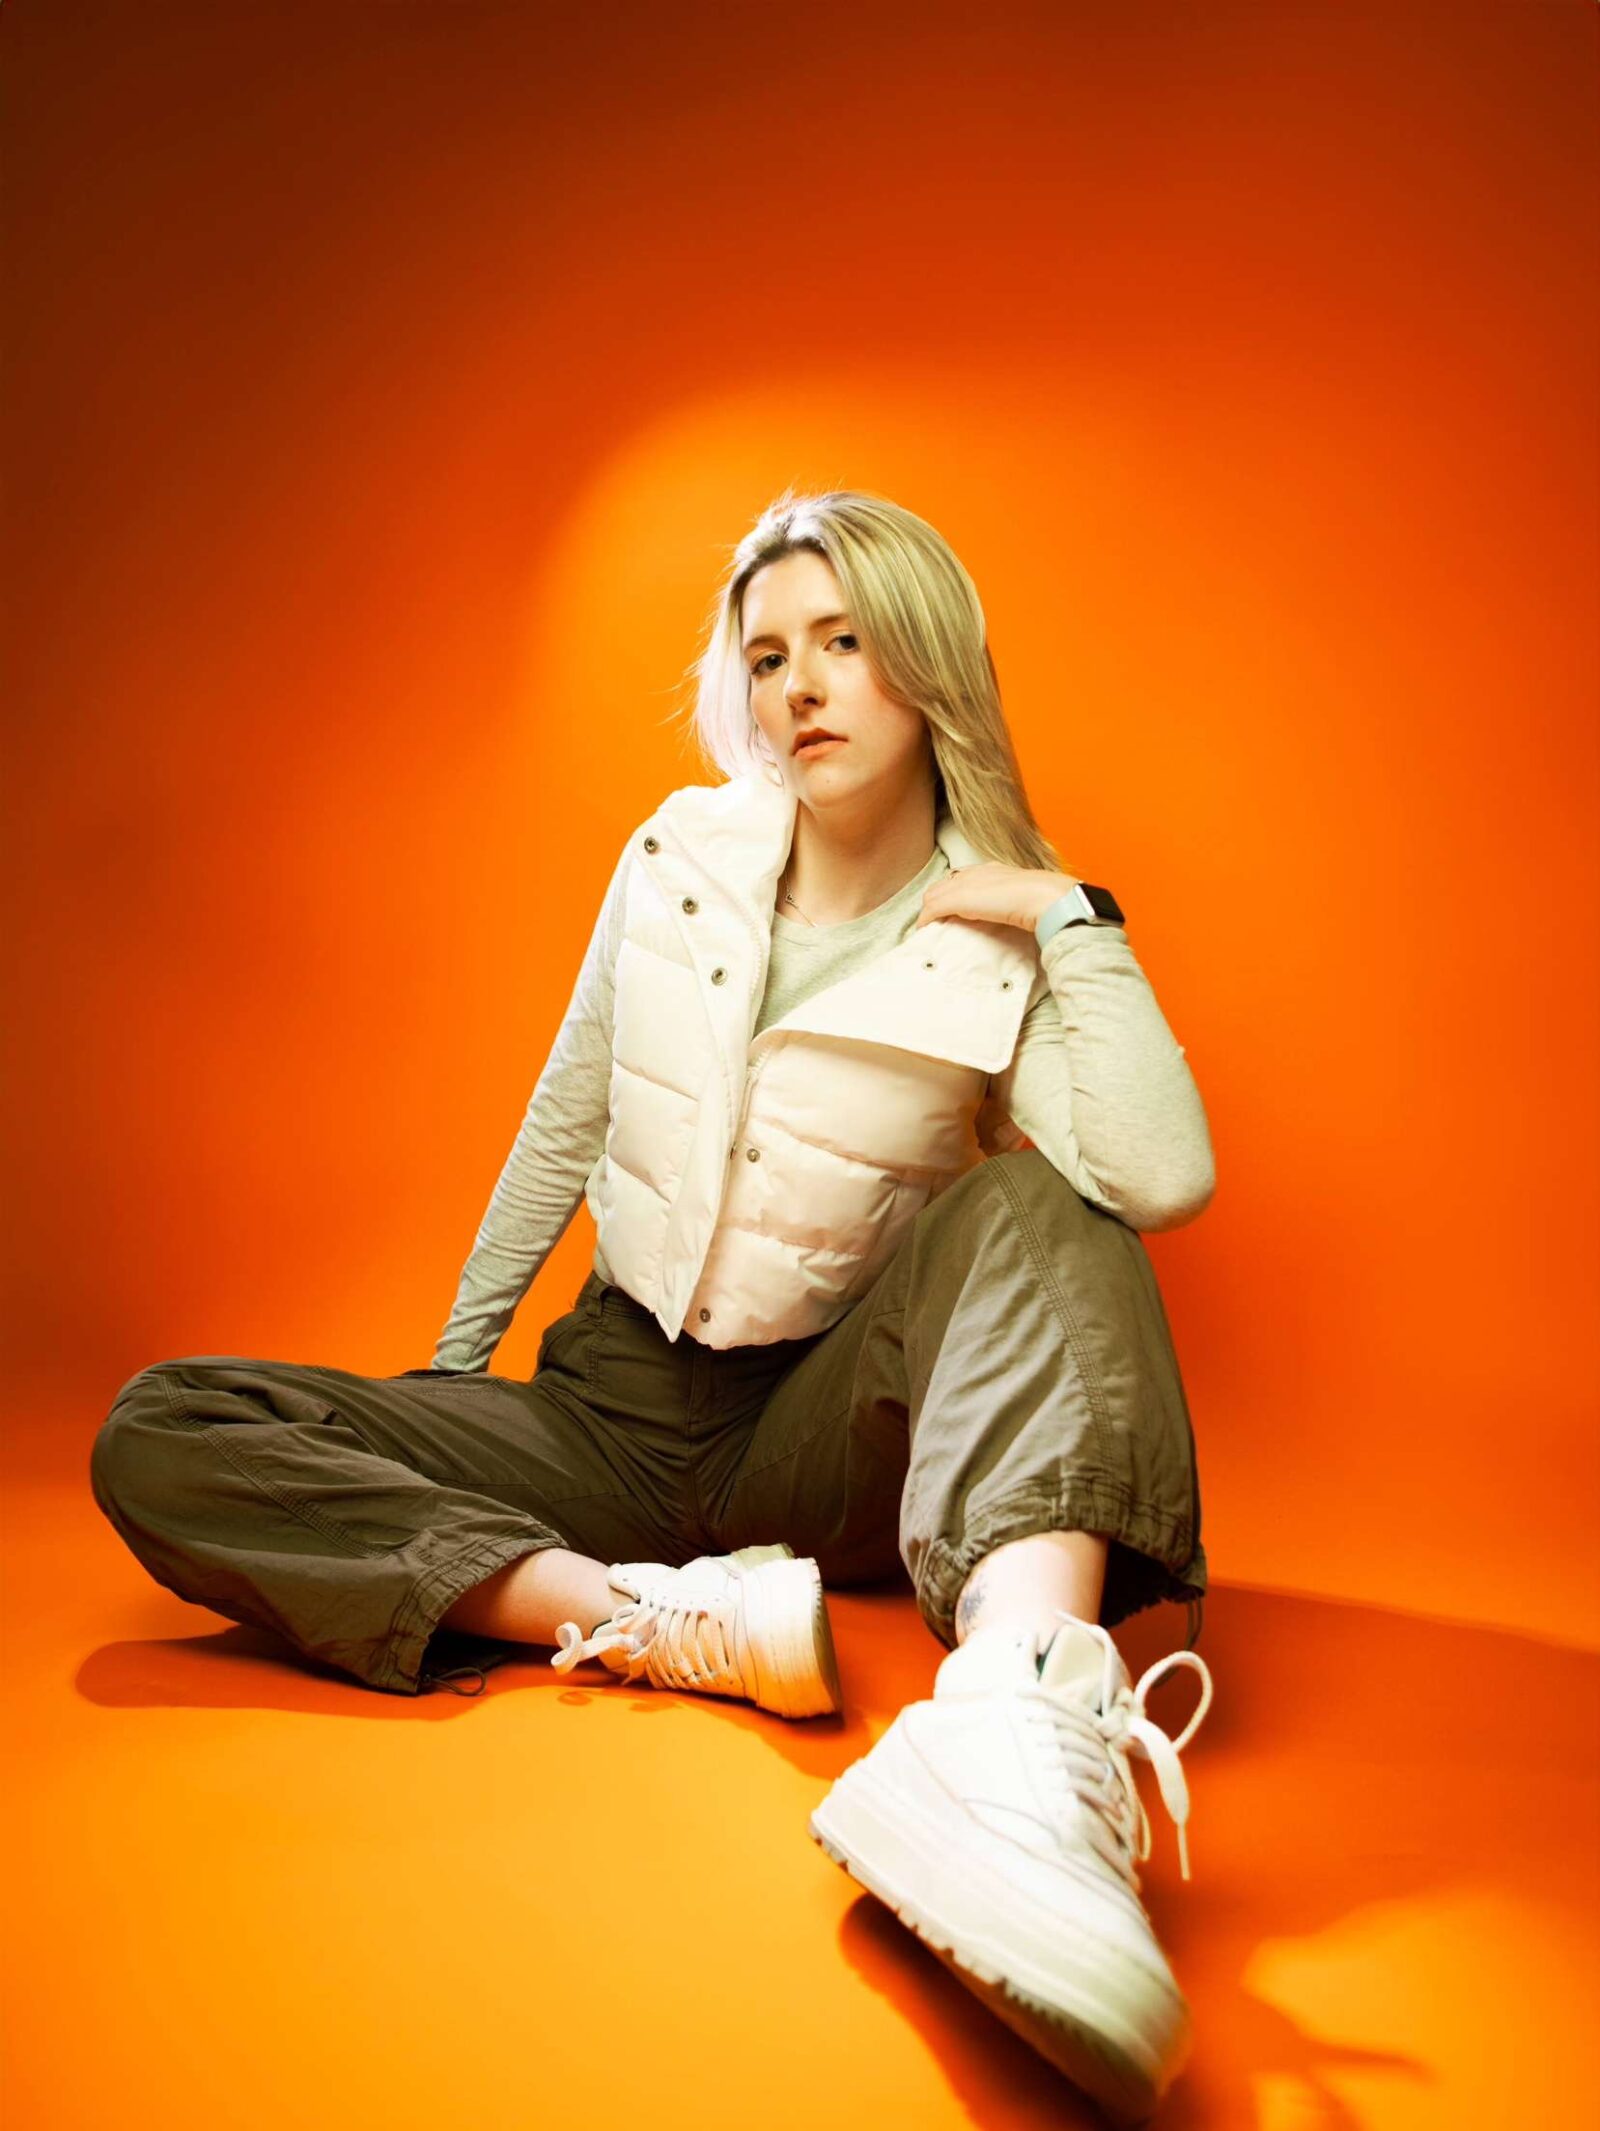 courtney sitting wearing a vest and sneakers